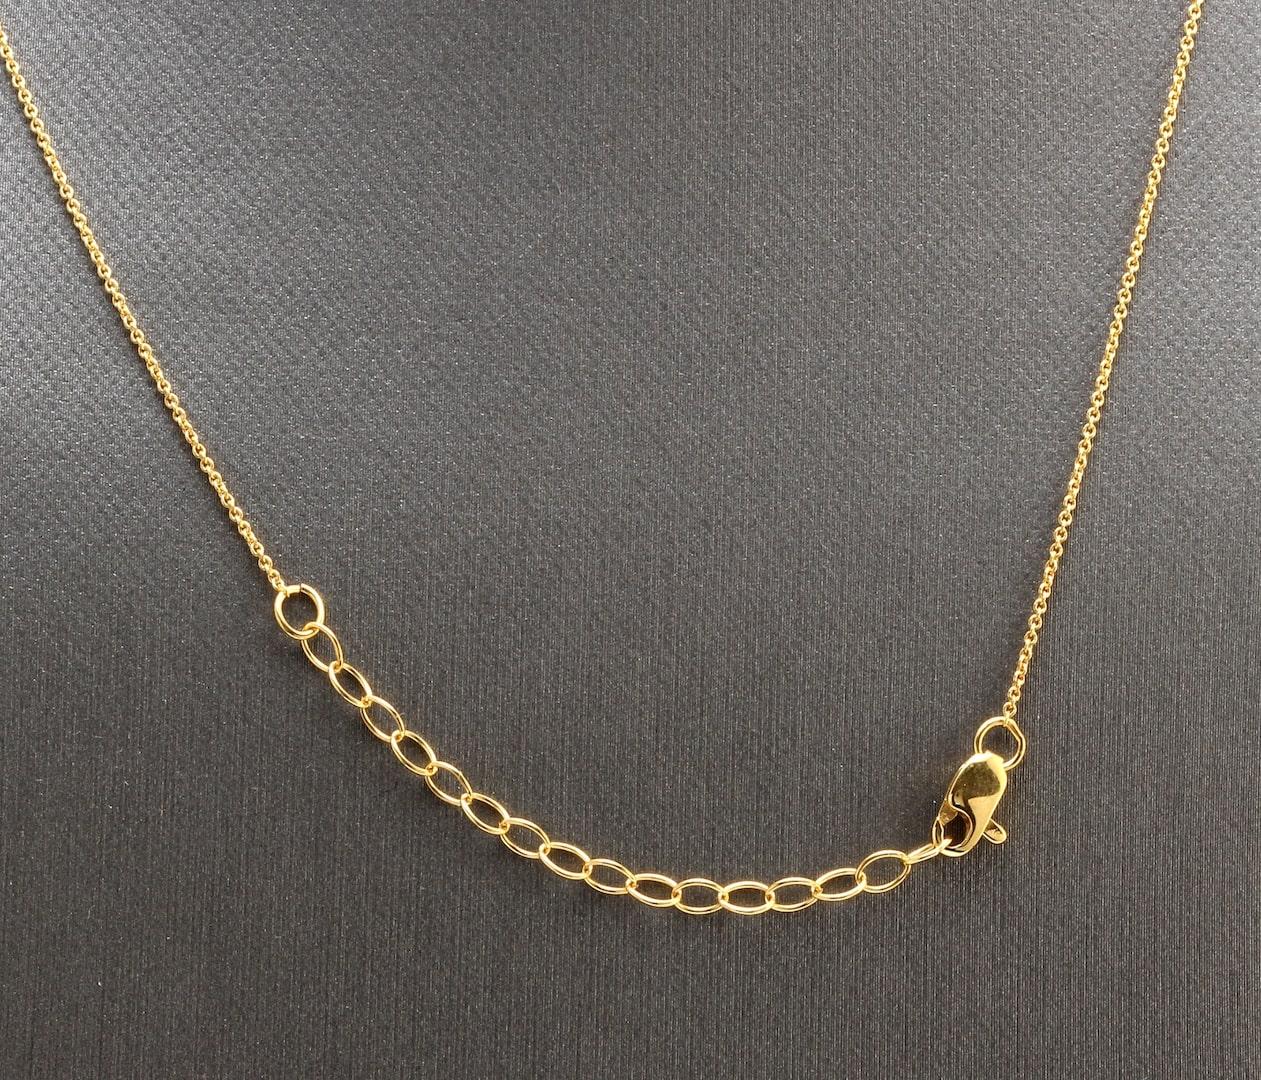 Splendid 14k Solid Yellow Gold Infinity Necklace with Natural Diamond Accent In New Condition For Sale In Los Angeles, CA